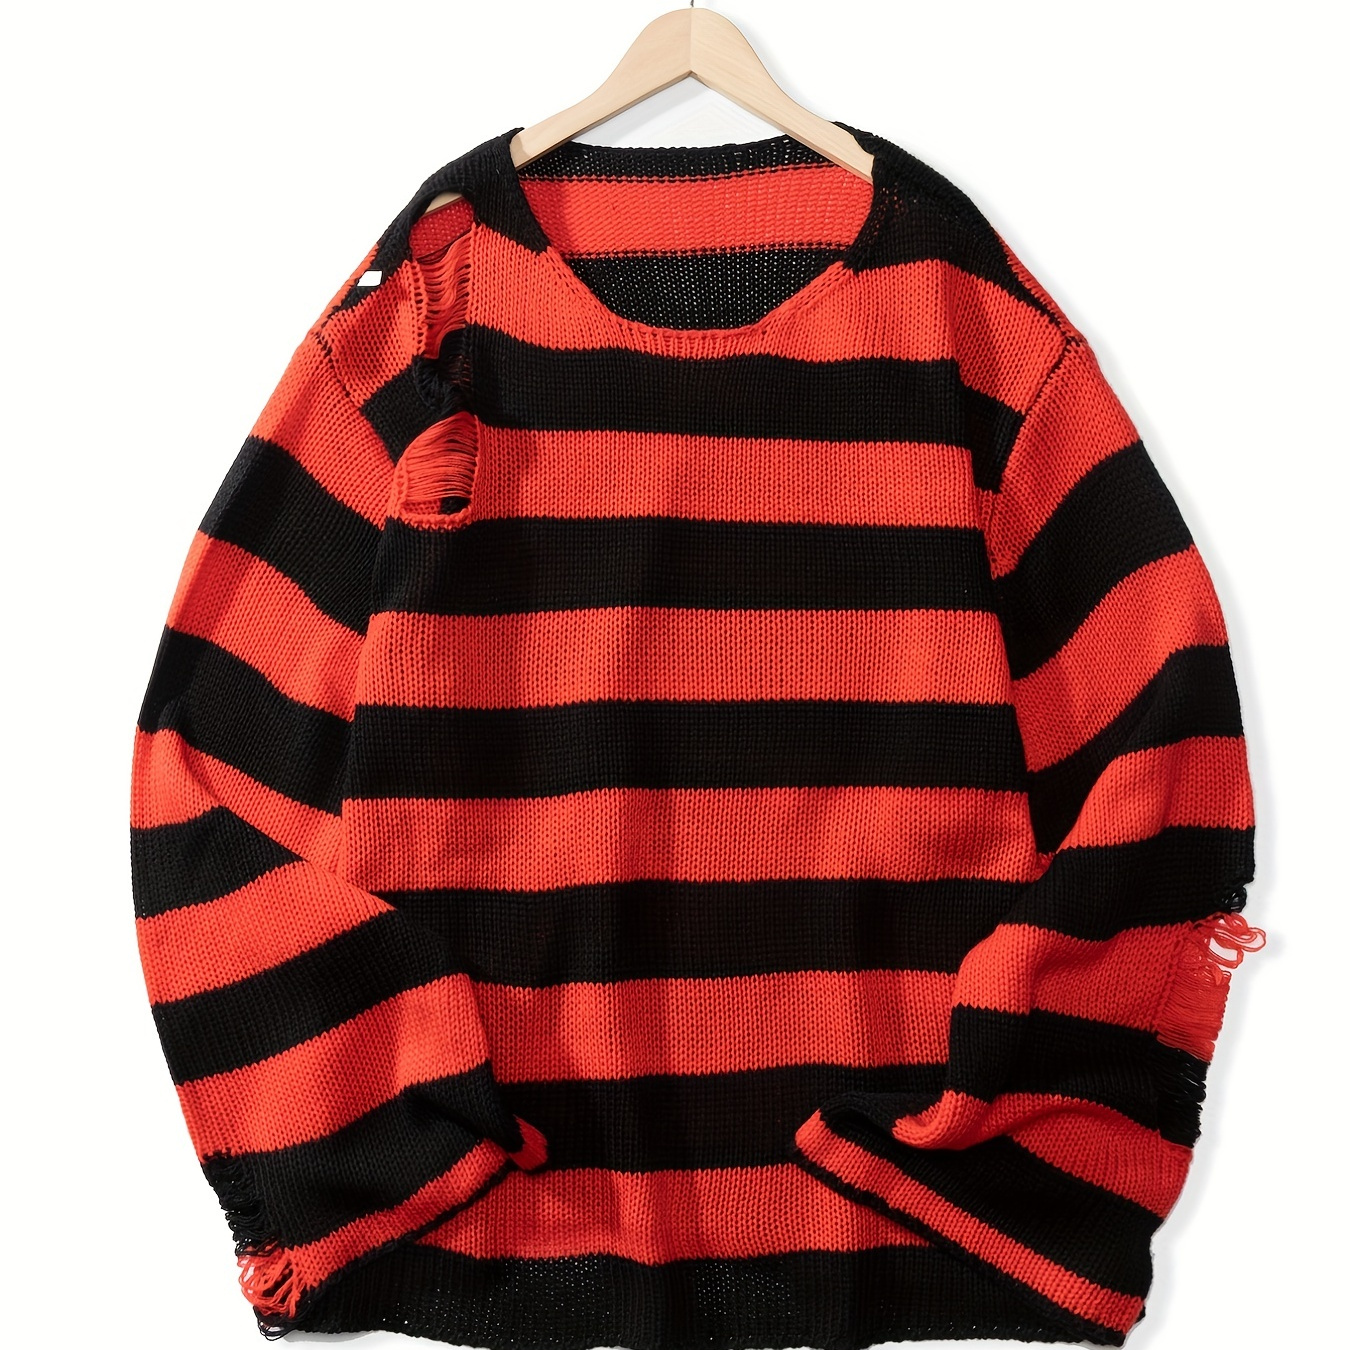 

Plus Size Men's Fashion Striped Sweater Ripped Knit Sweater, Long-sleeved Pullover Spring/autumn Tops For Big & Tall Guys